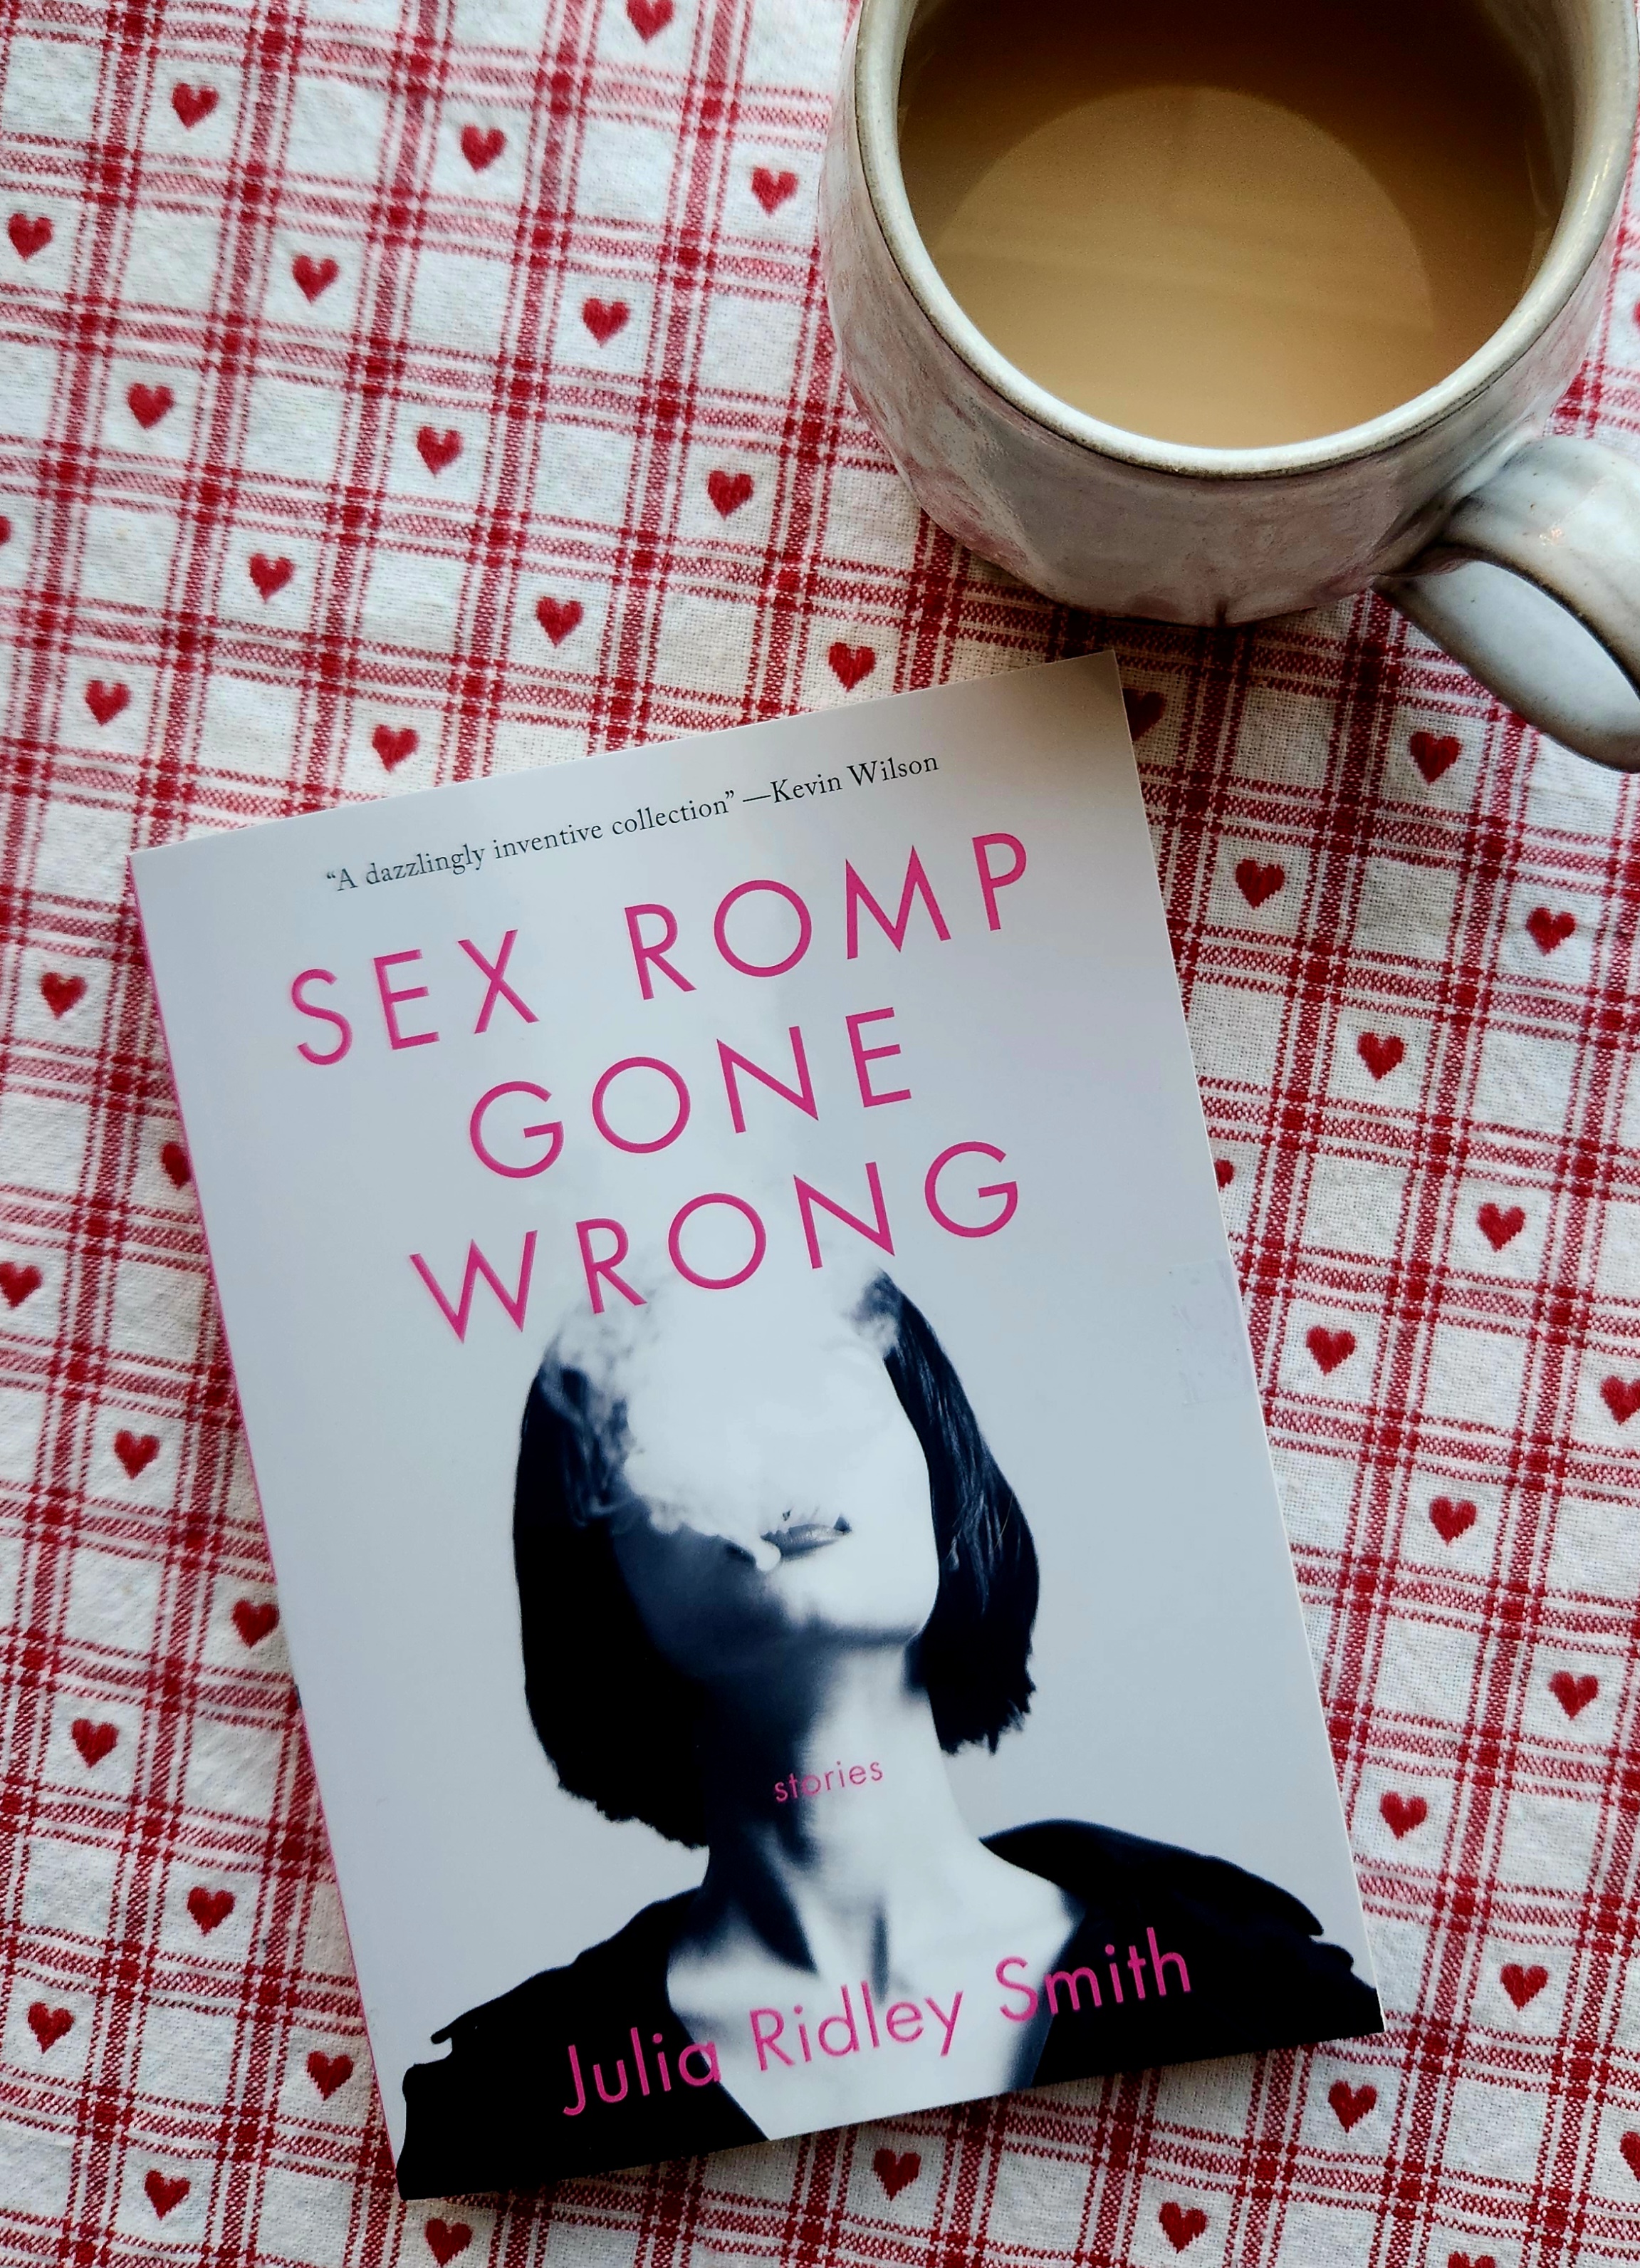 Book Review of SEX ROMP GONE WRONG